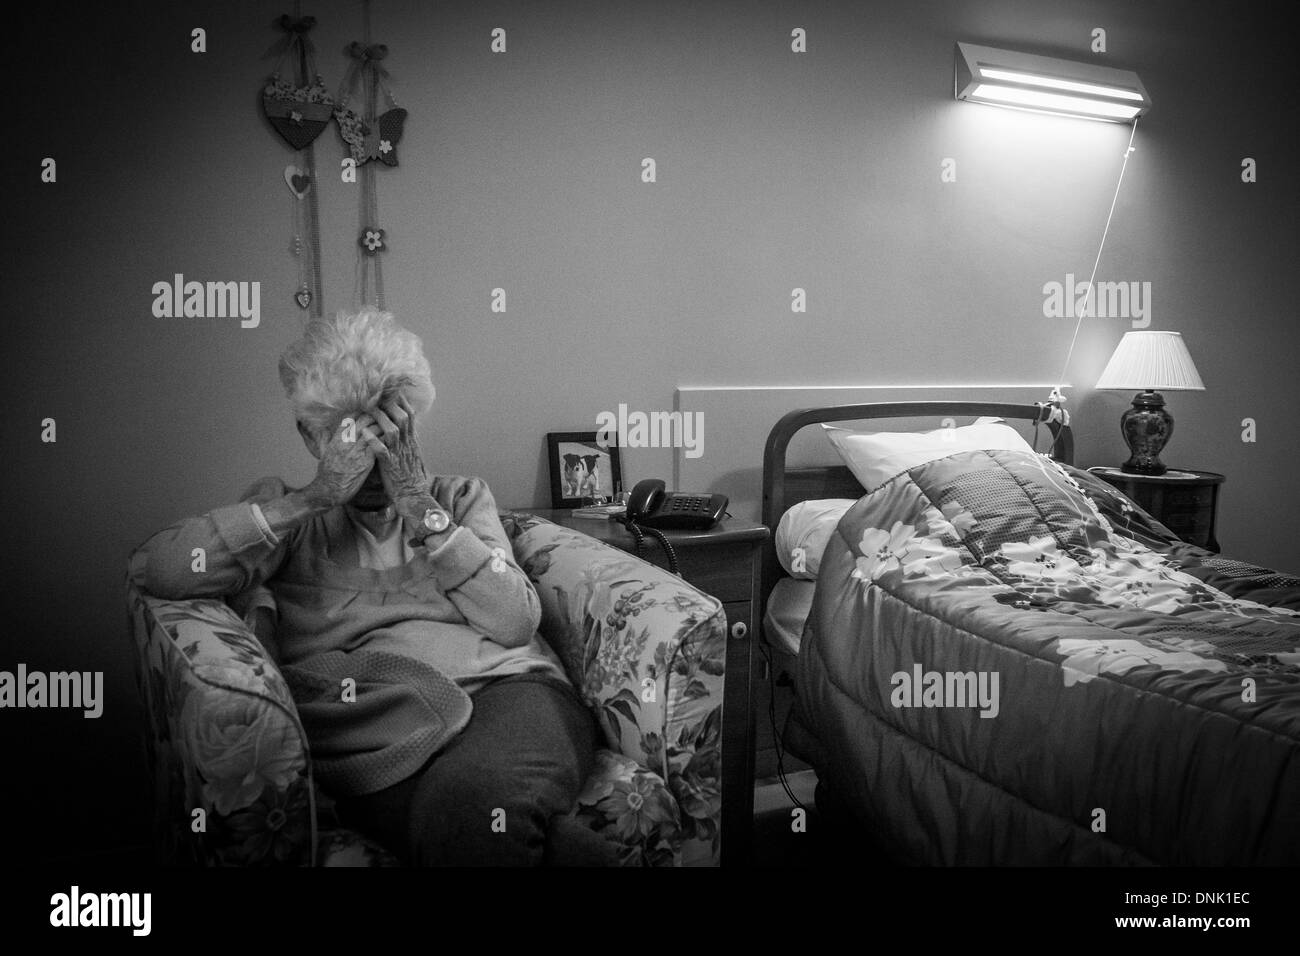 RETIREMENT HOME ILLUSTRATION, ELDERLY PERSON IN A BEDROOM SUFFERING FROM LONELINESS Stock Photo